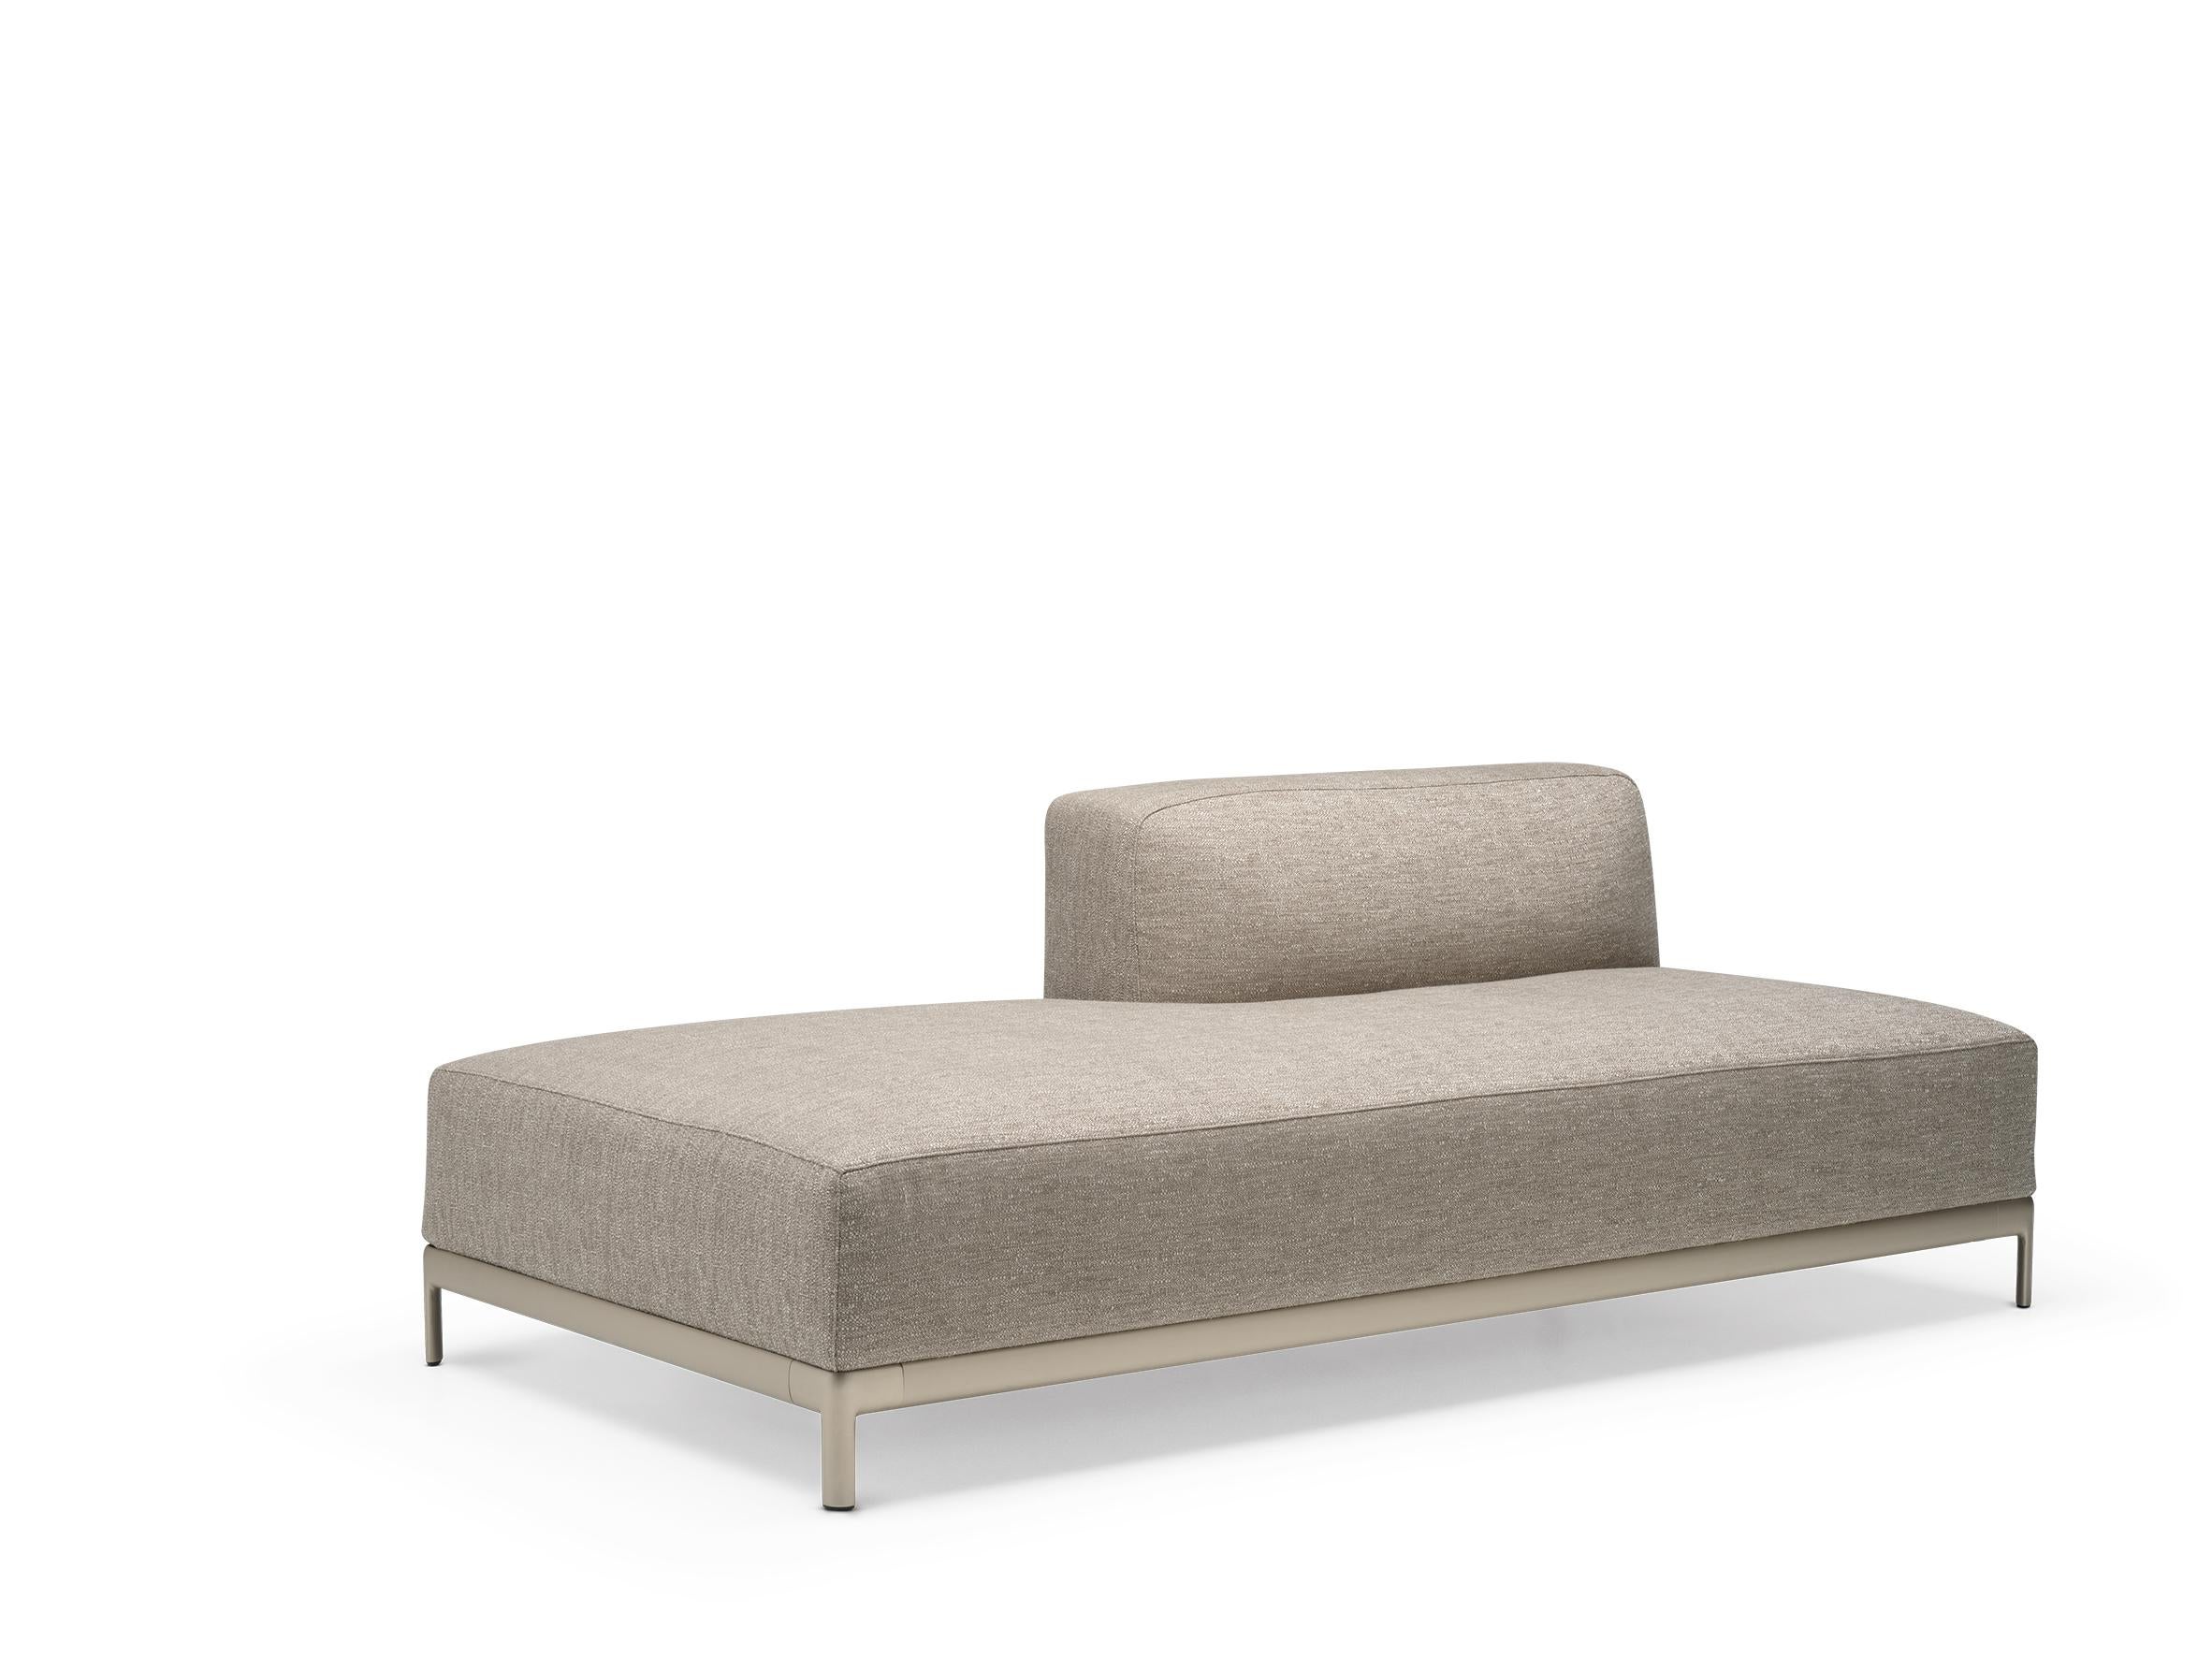 Alias P41 AluZen Soft Ending Sofa in Brown Upholstery & Anodized Gold Frame by Ludovica+Roberto Palomba

Modular closing element with structure in lacquered or polished aluminium.Seat and back with removable cover in fabric or leather.Available in